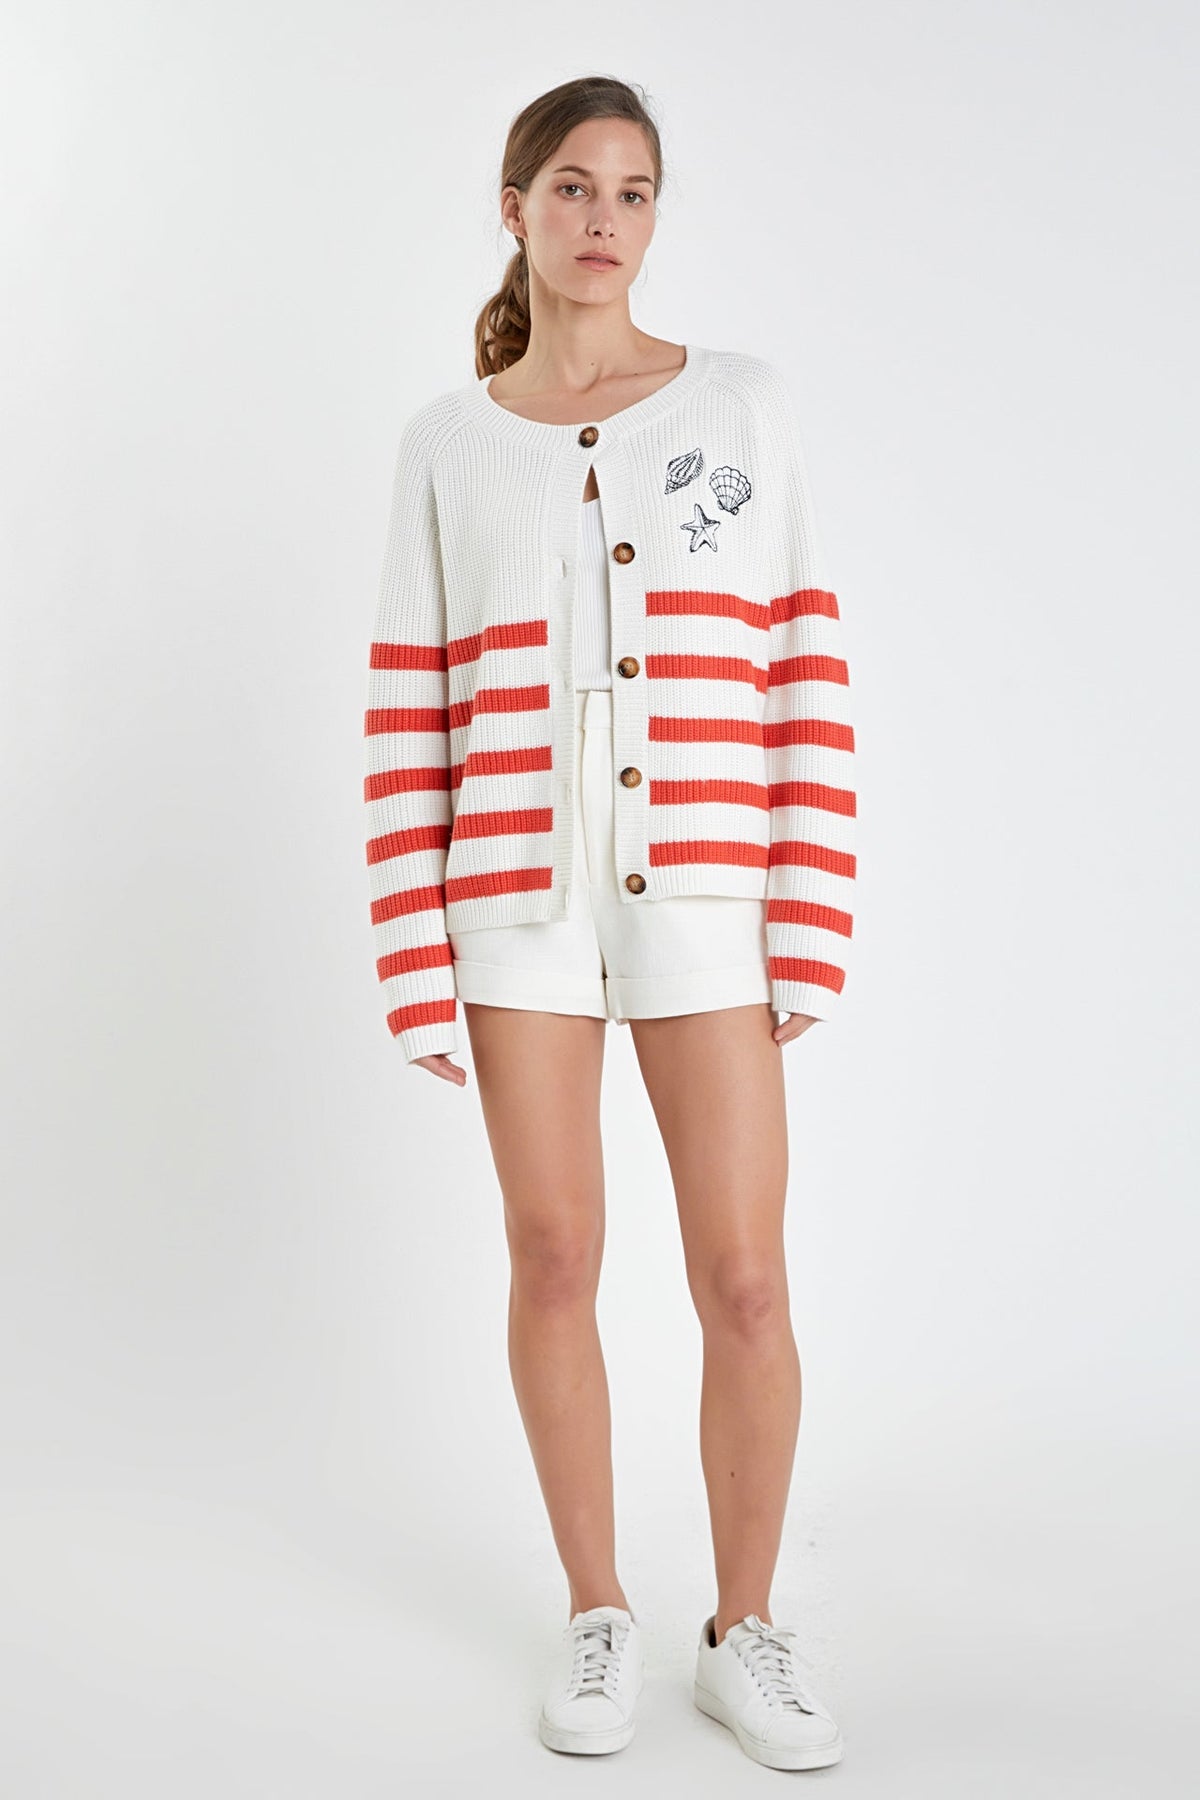 ENGLISH FACTORY - Breton Striped Cardigan with Shell Embroidery - SWEATERS & KNITS available at Objectrare